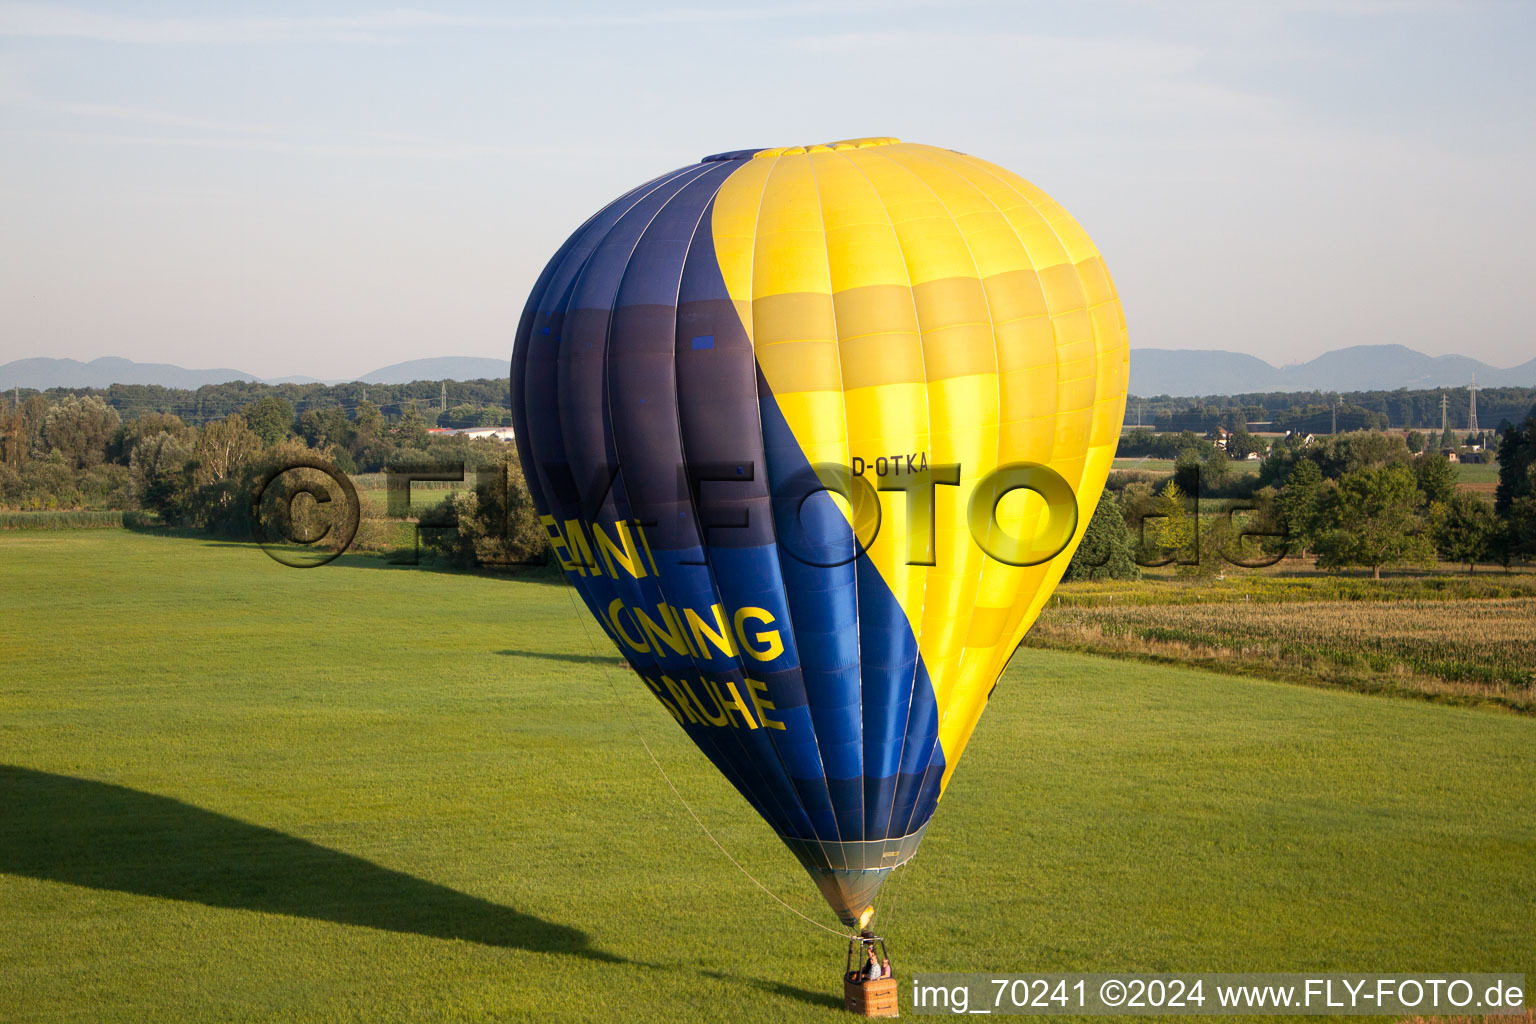 Aerial photograpy of Balloon on the run in Erlenbach bei Kandel in the state Rhineland-Palatinate, Germany